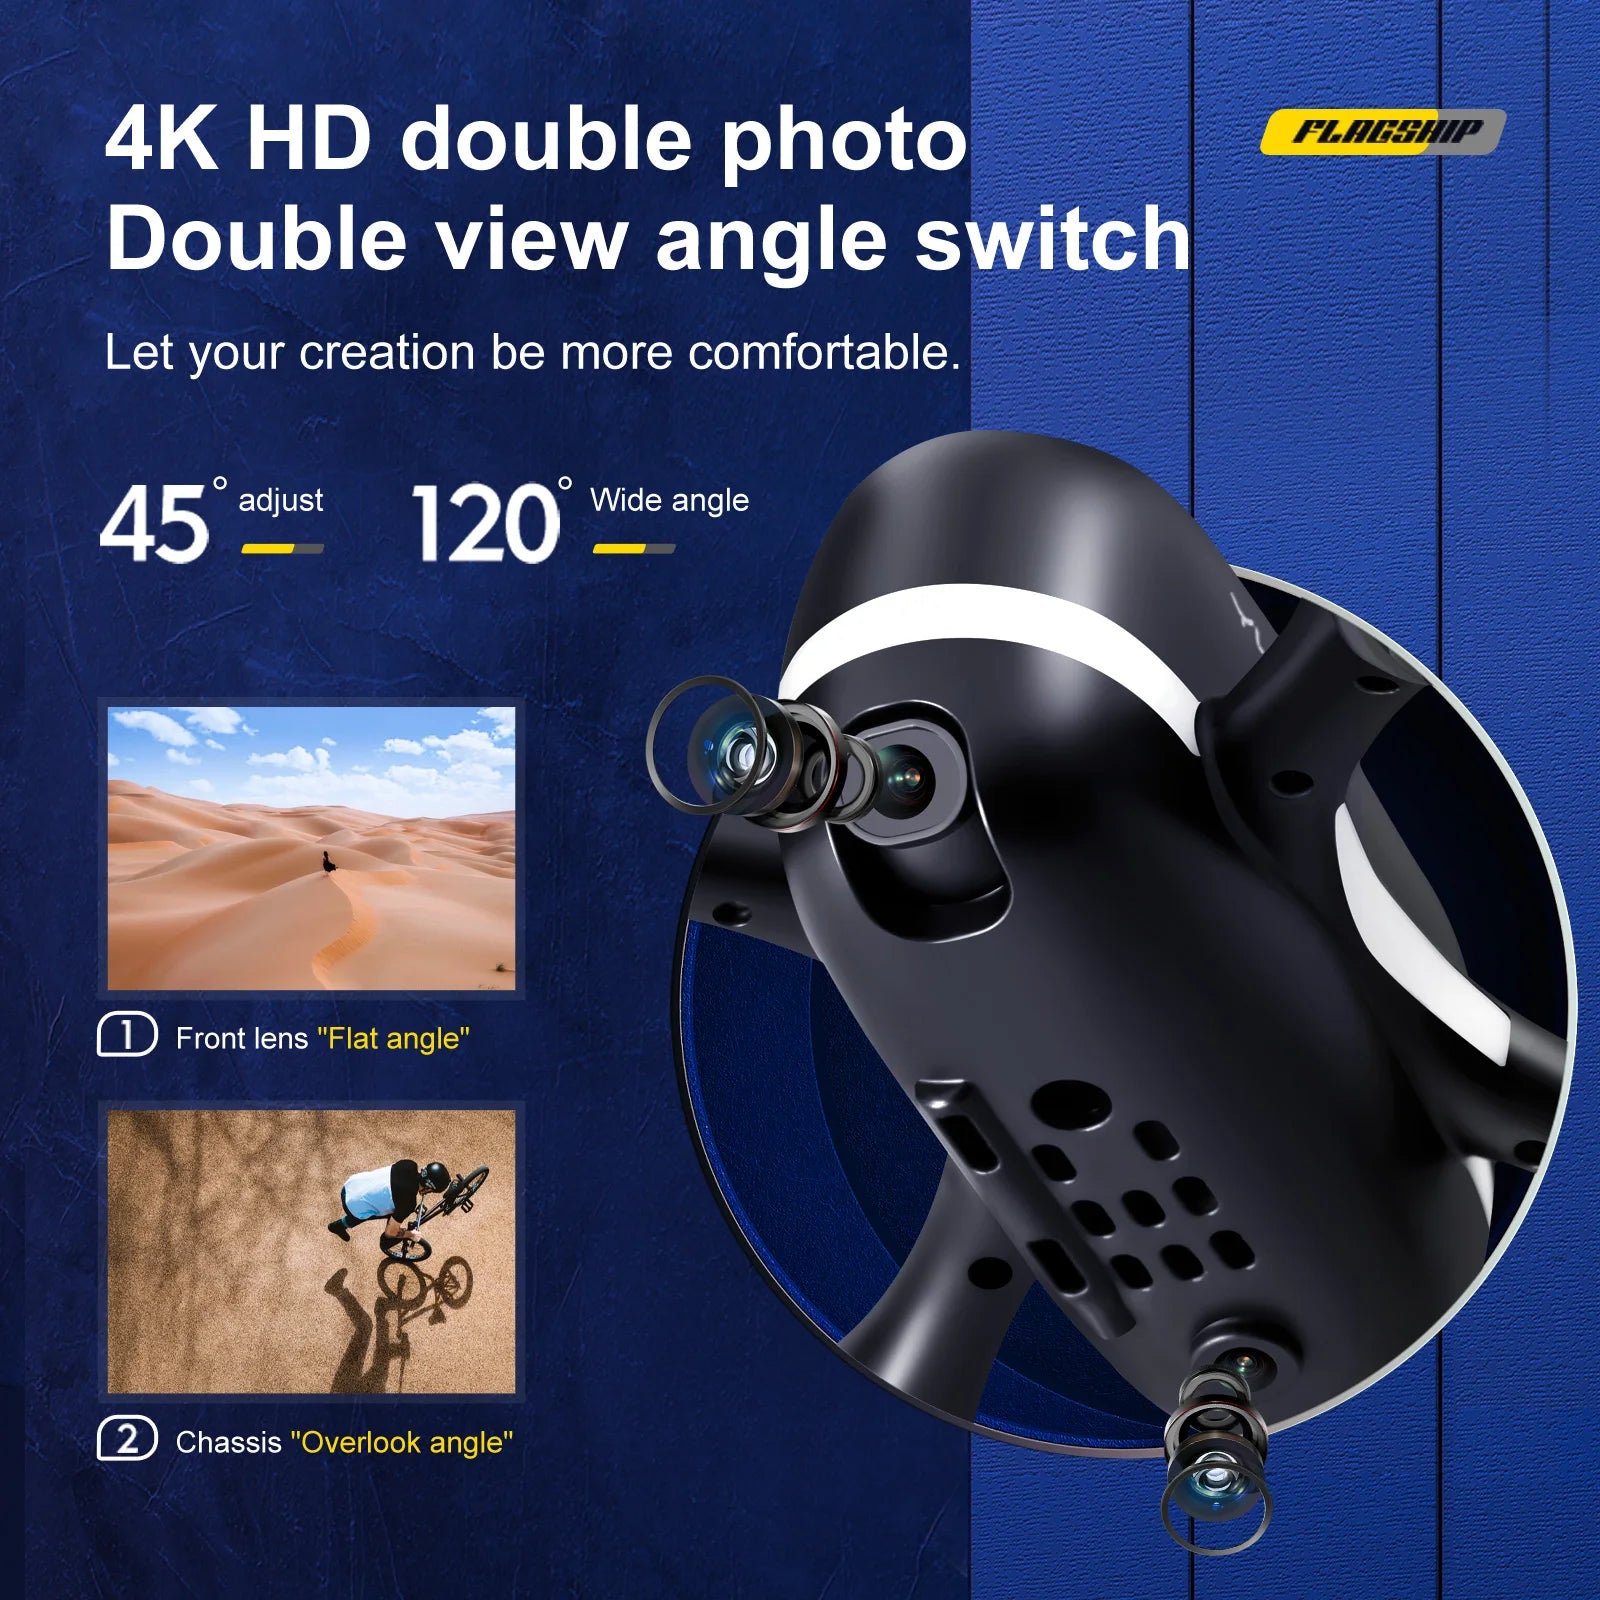 S88 Drone, flaeghip double view angle switch lets your creation be more comfortable